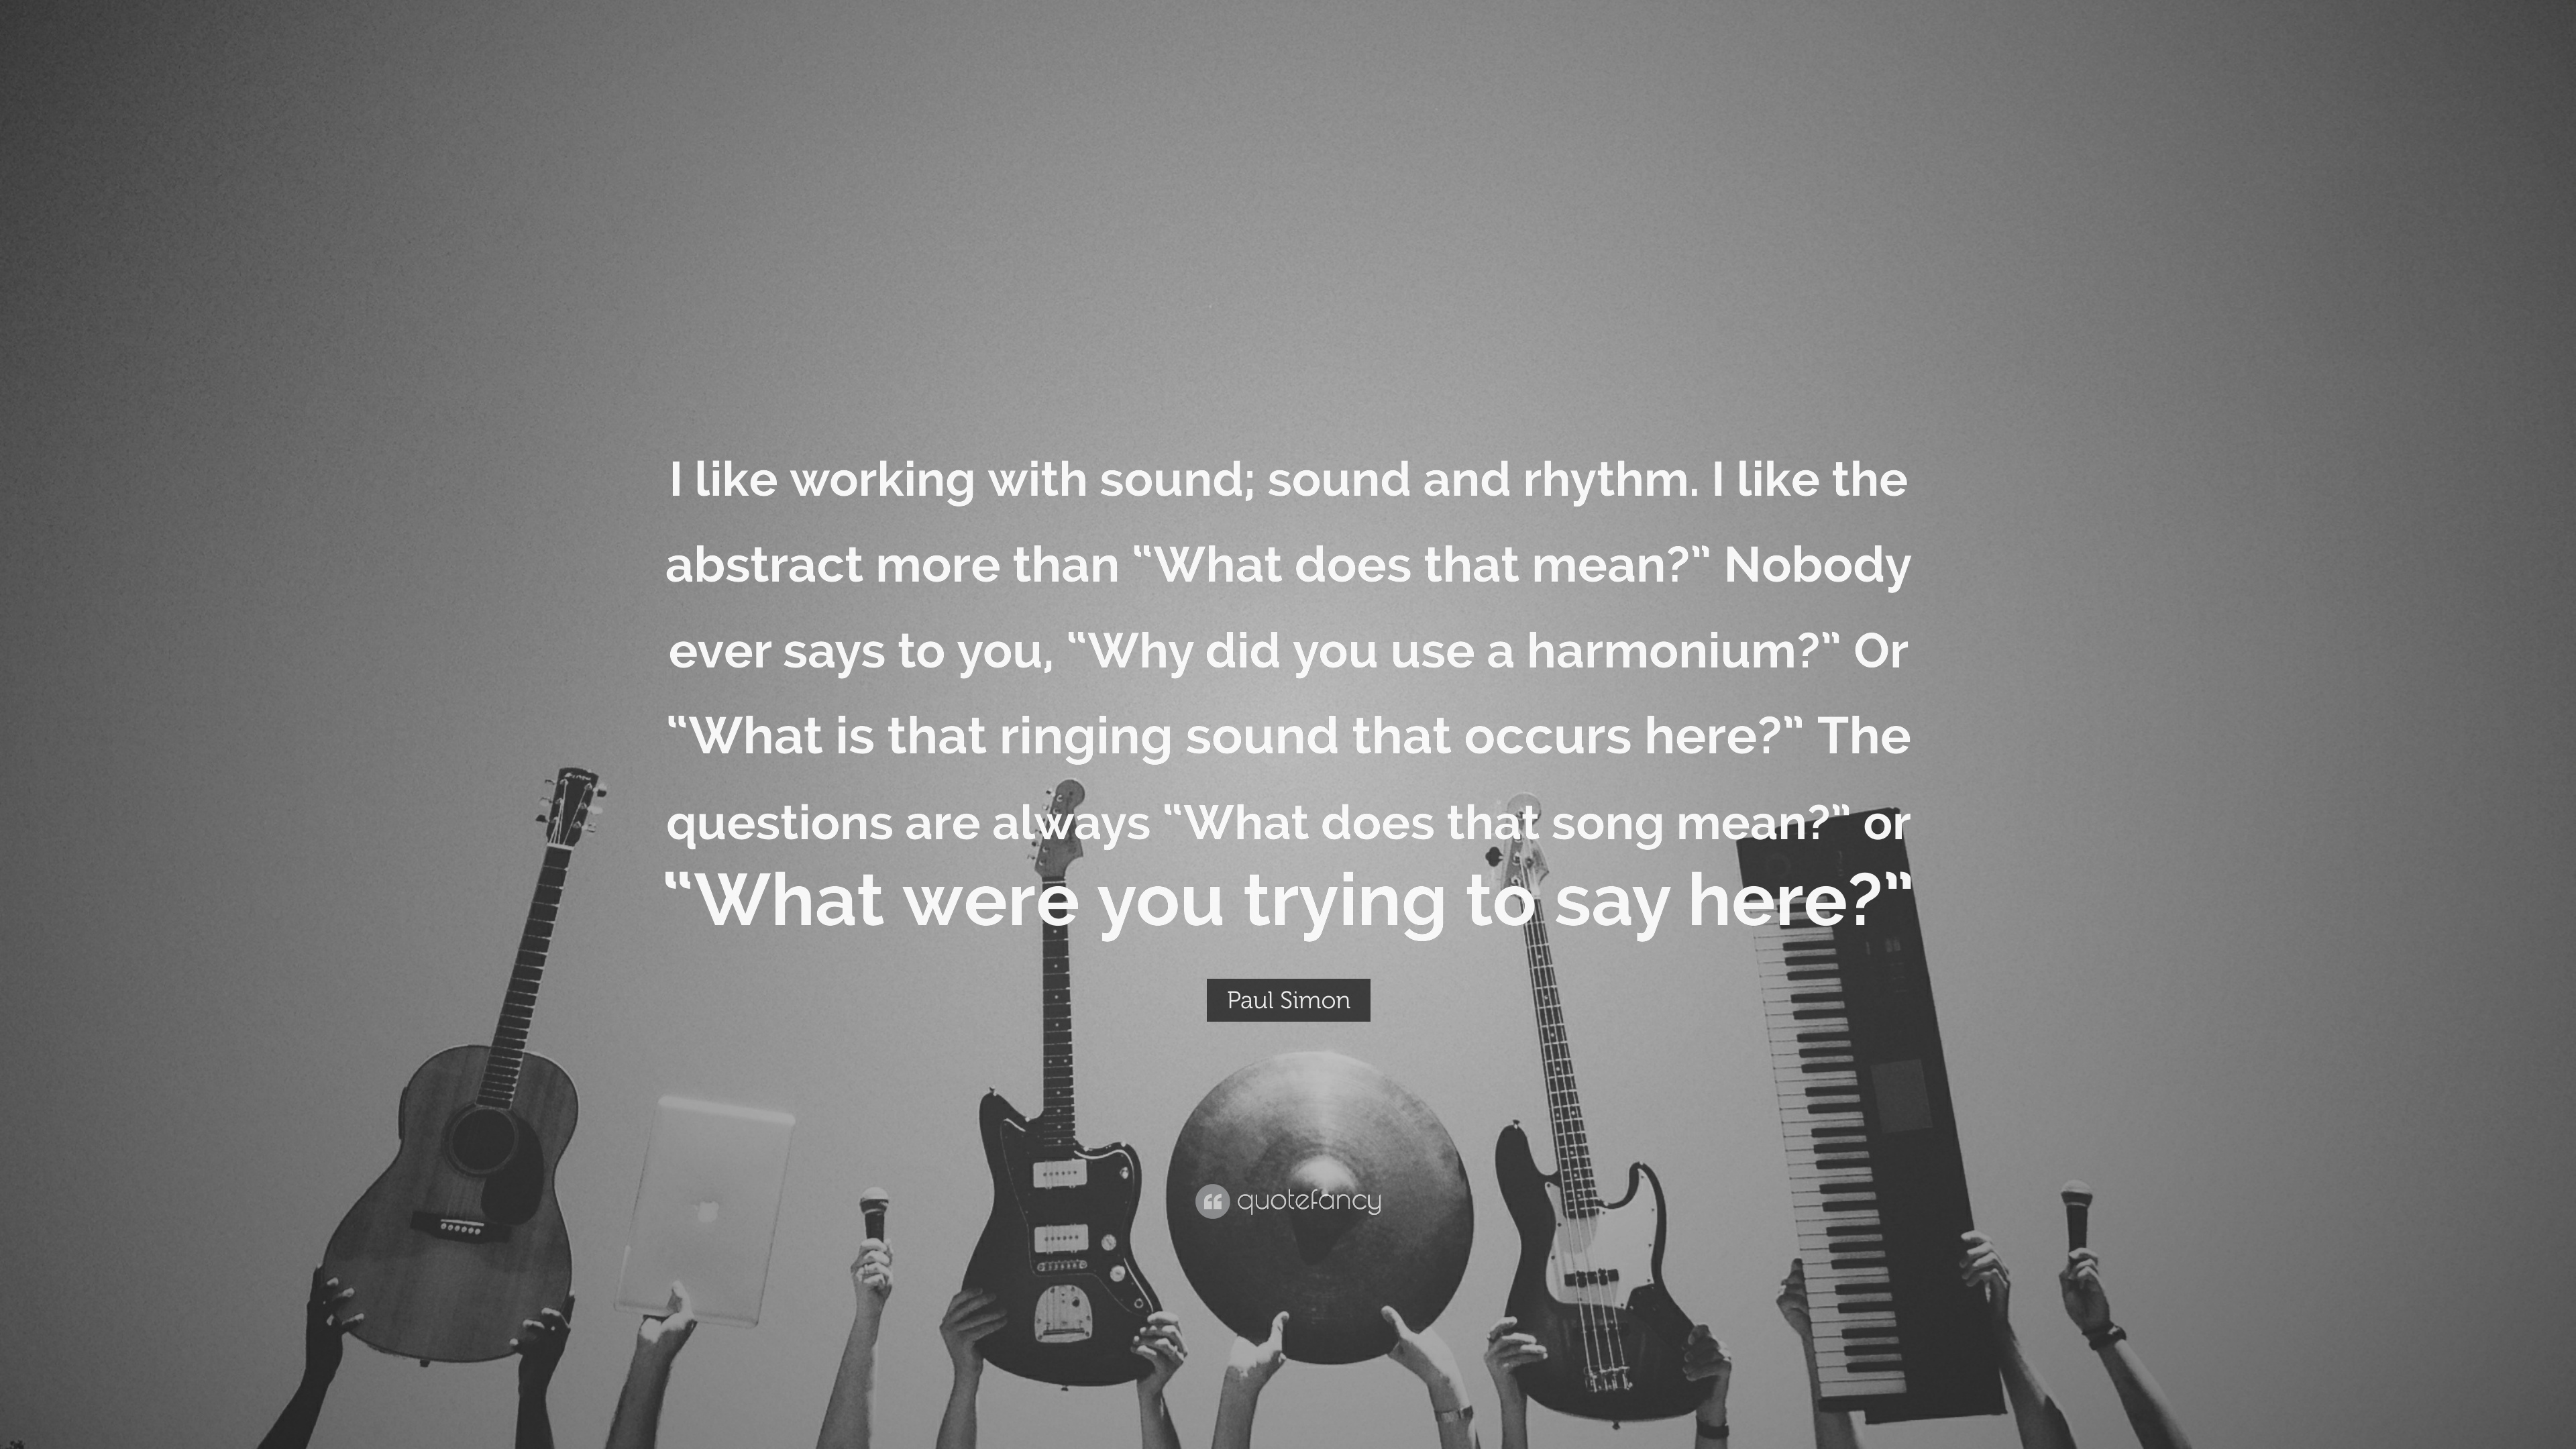 Paul Simon Quote: “I like working with sound; sound and rhythm. I